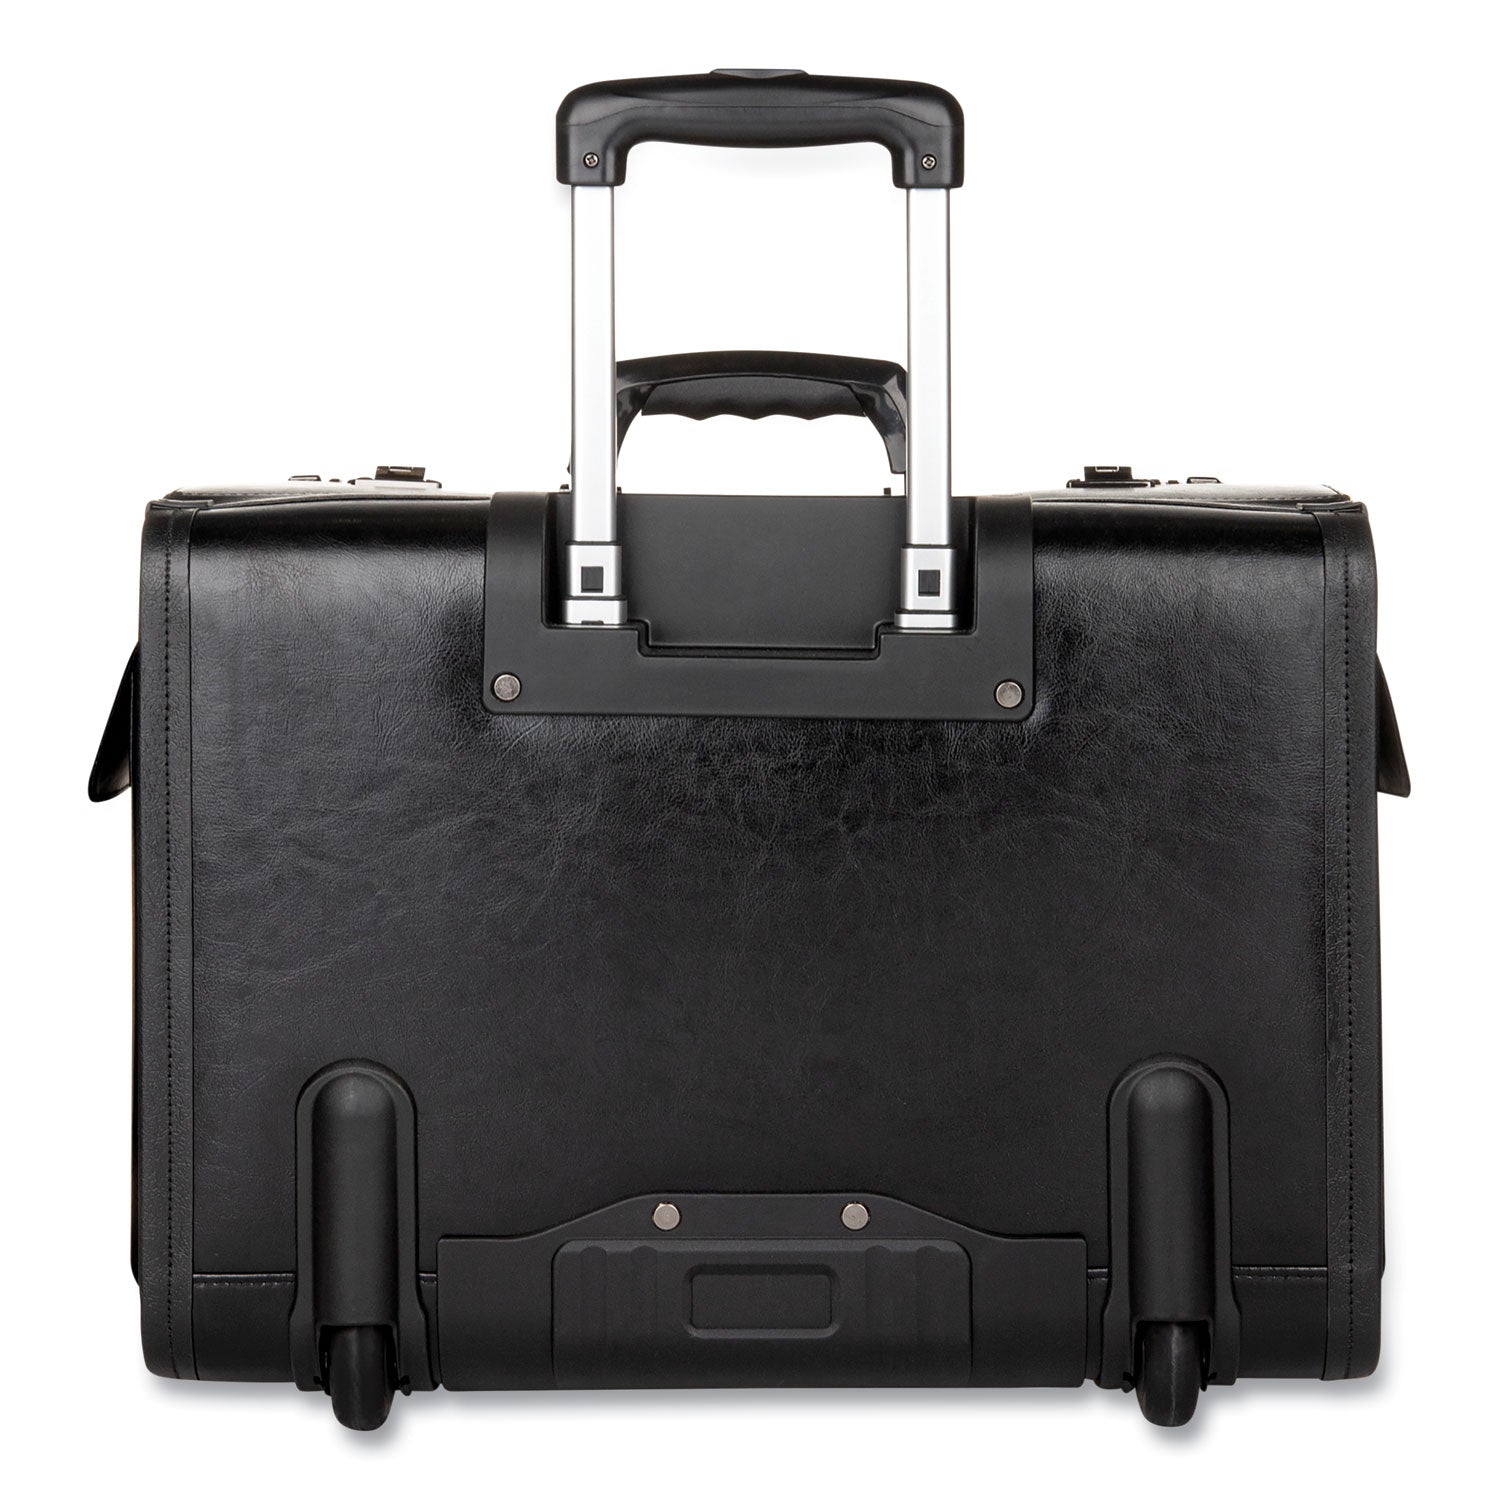 Catalog Case on Wheels, Fits Devices Up to 17.3", Leather, 19 x 9 x 15.5, Black - 